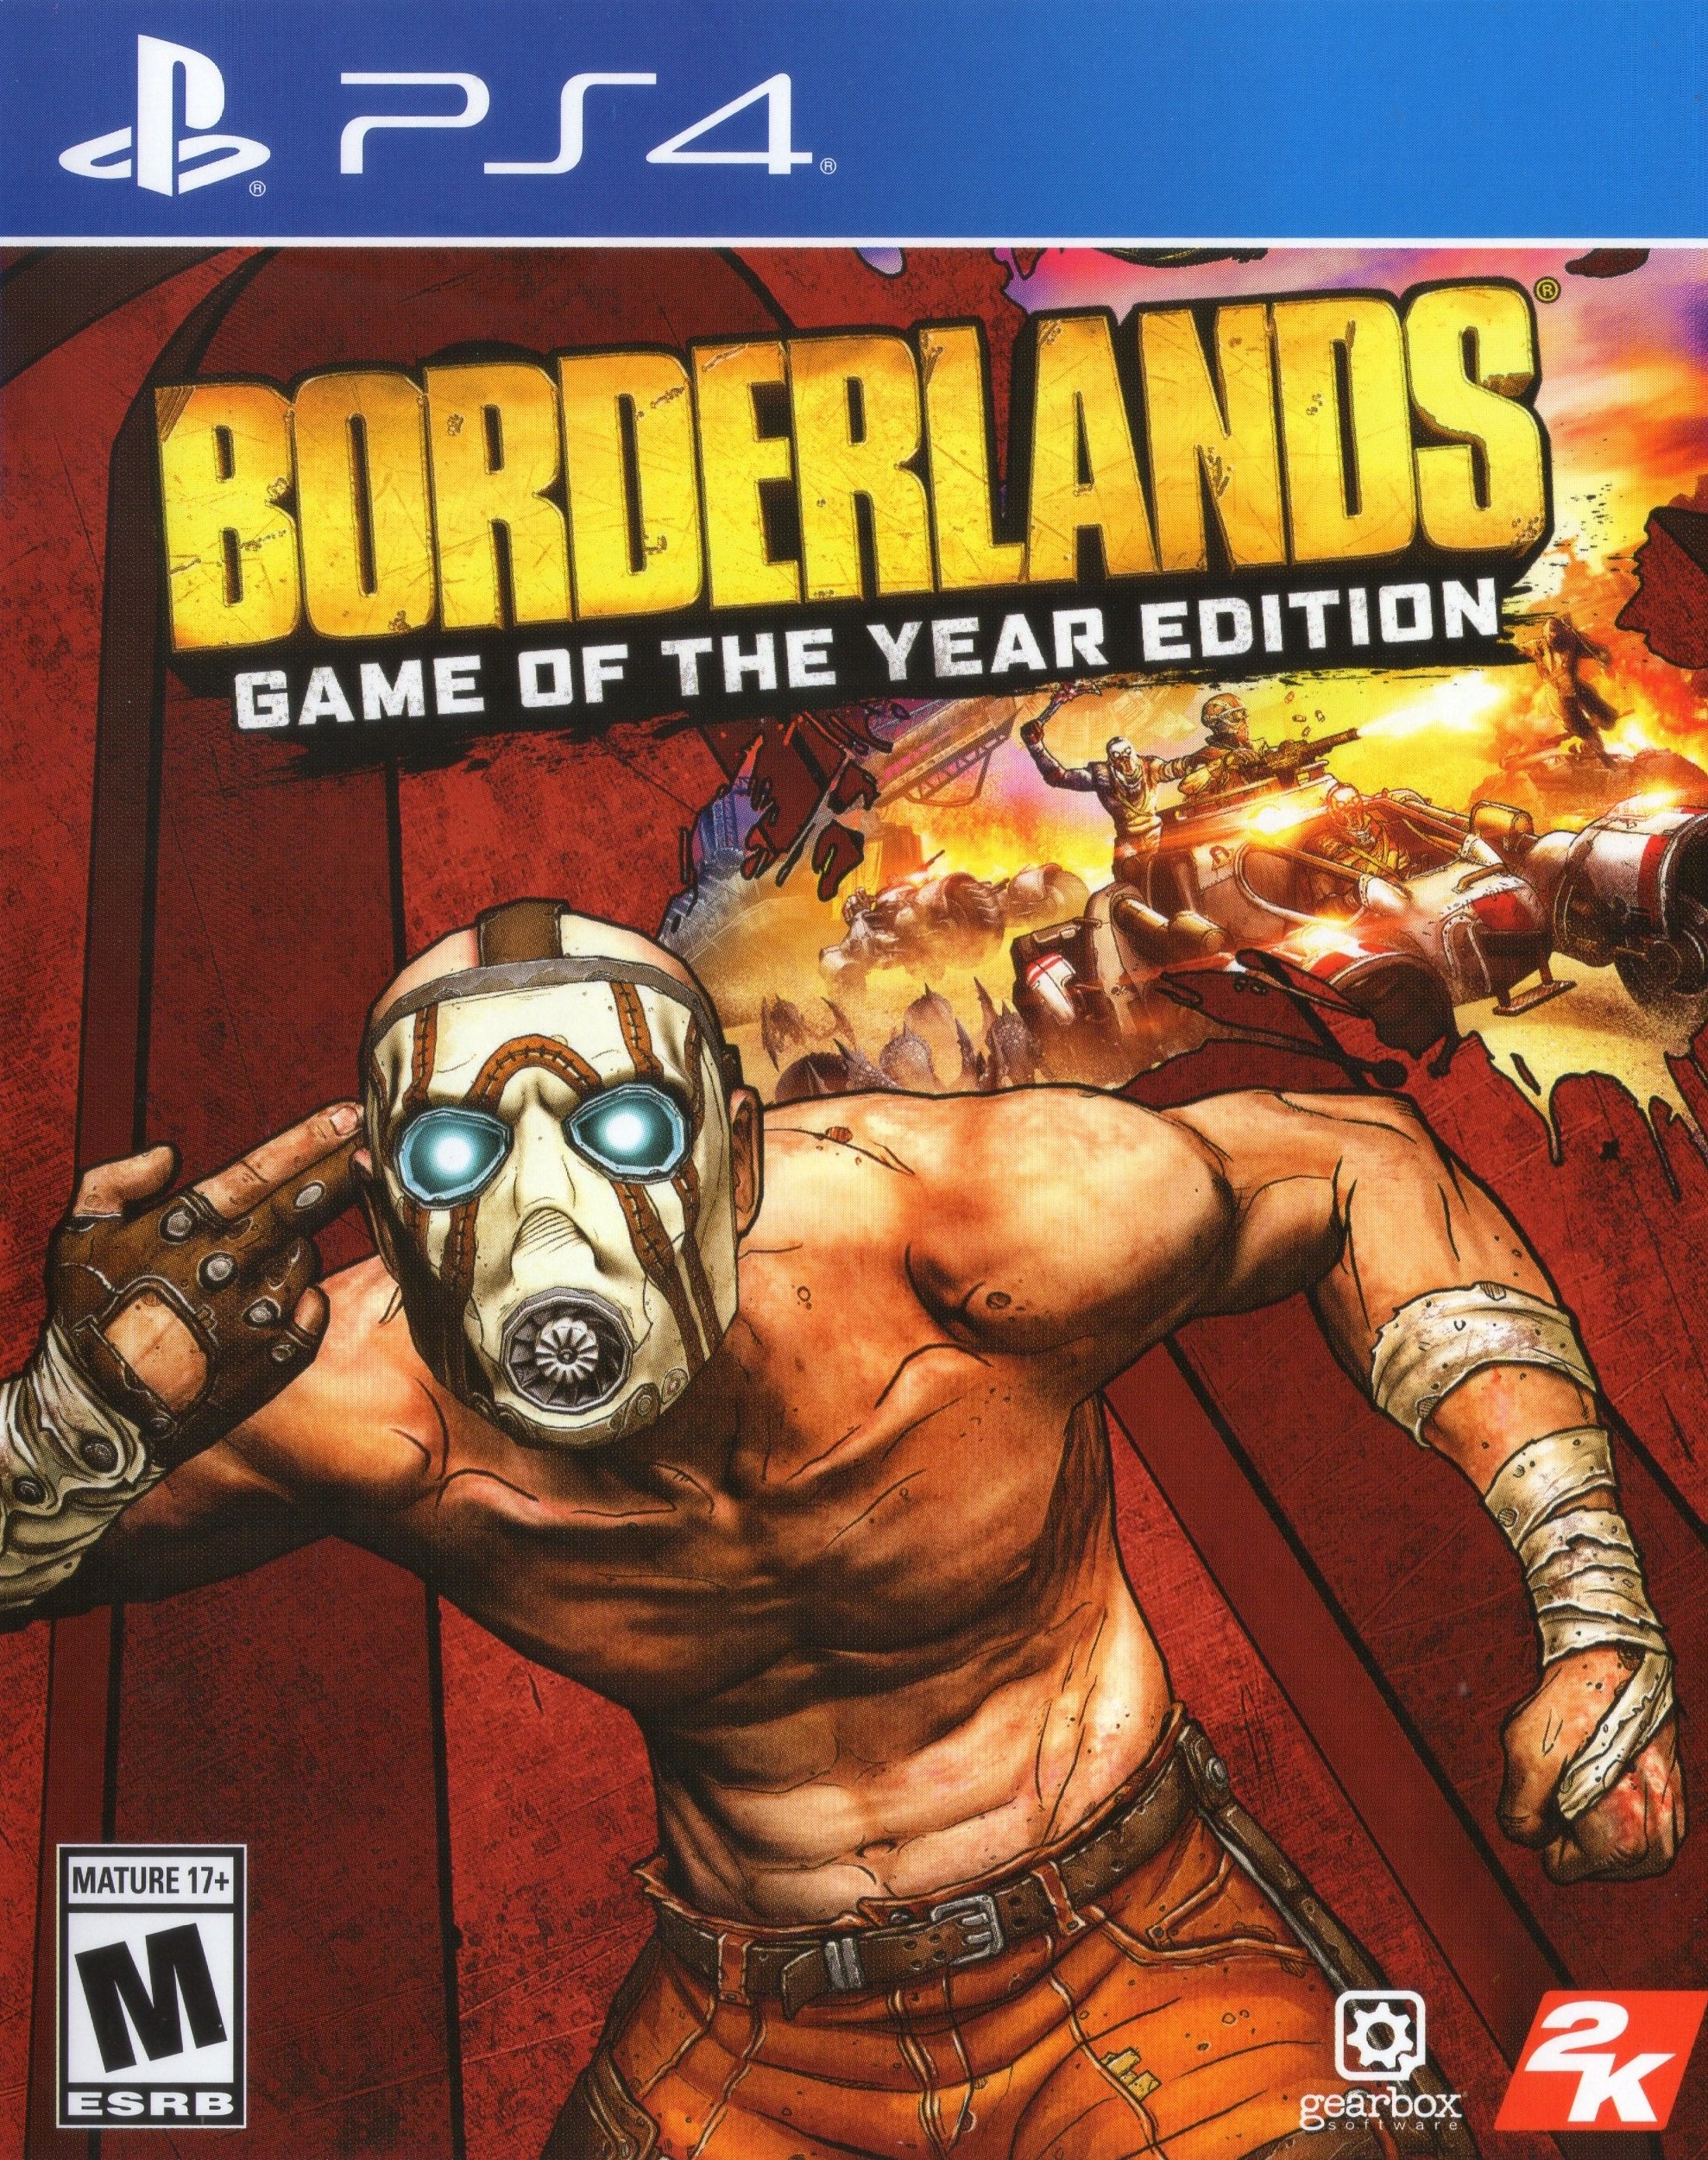 'Borderlands: Game of the Year Edition'